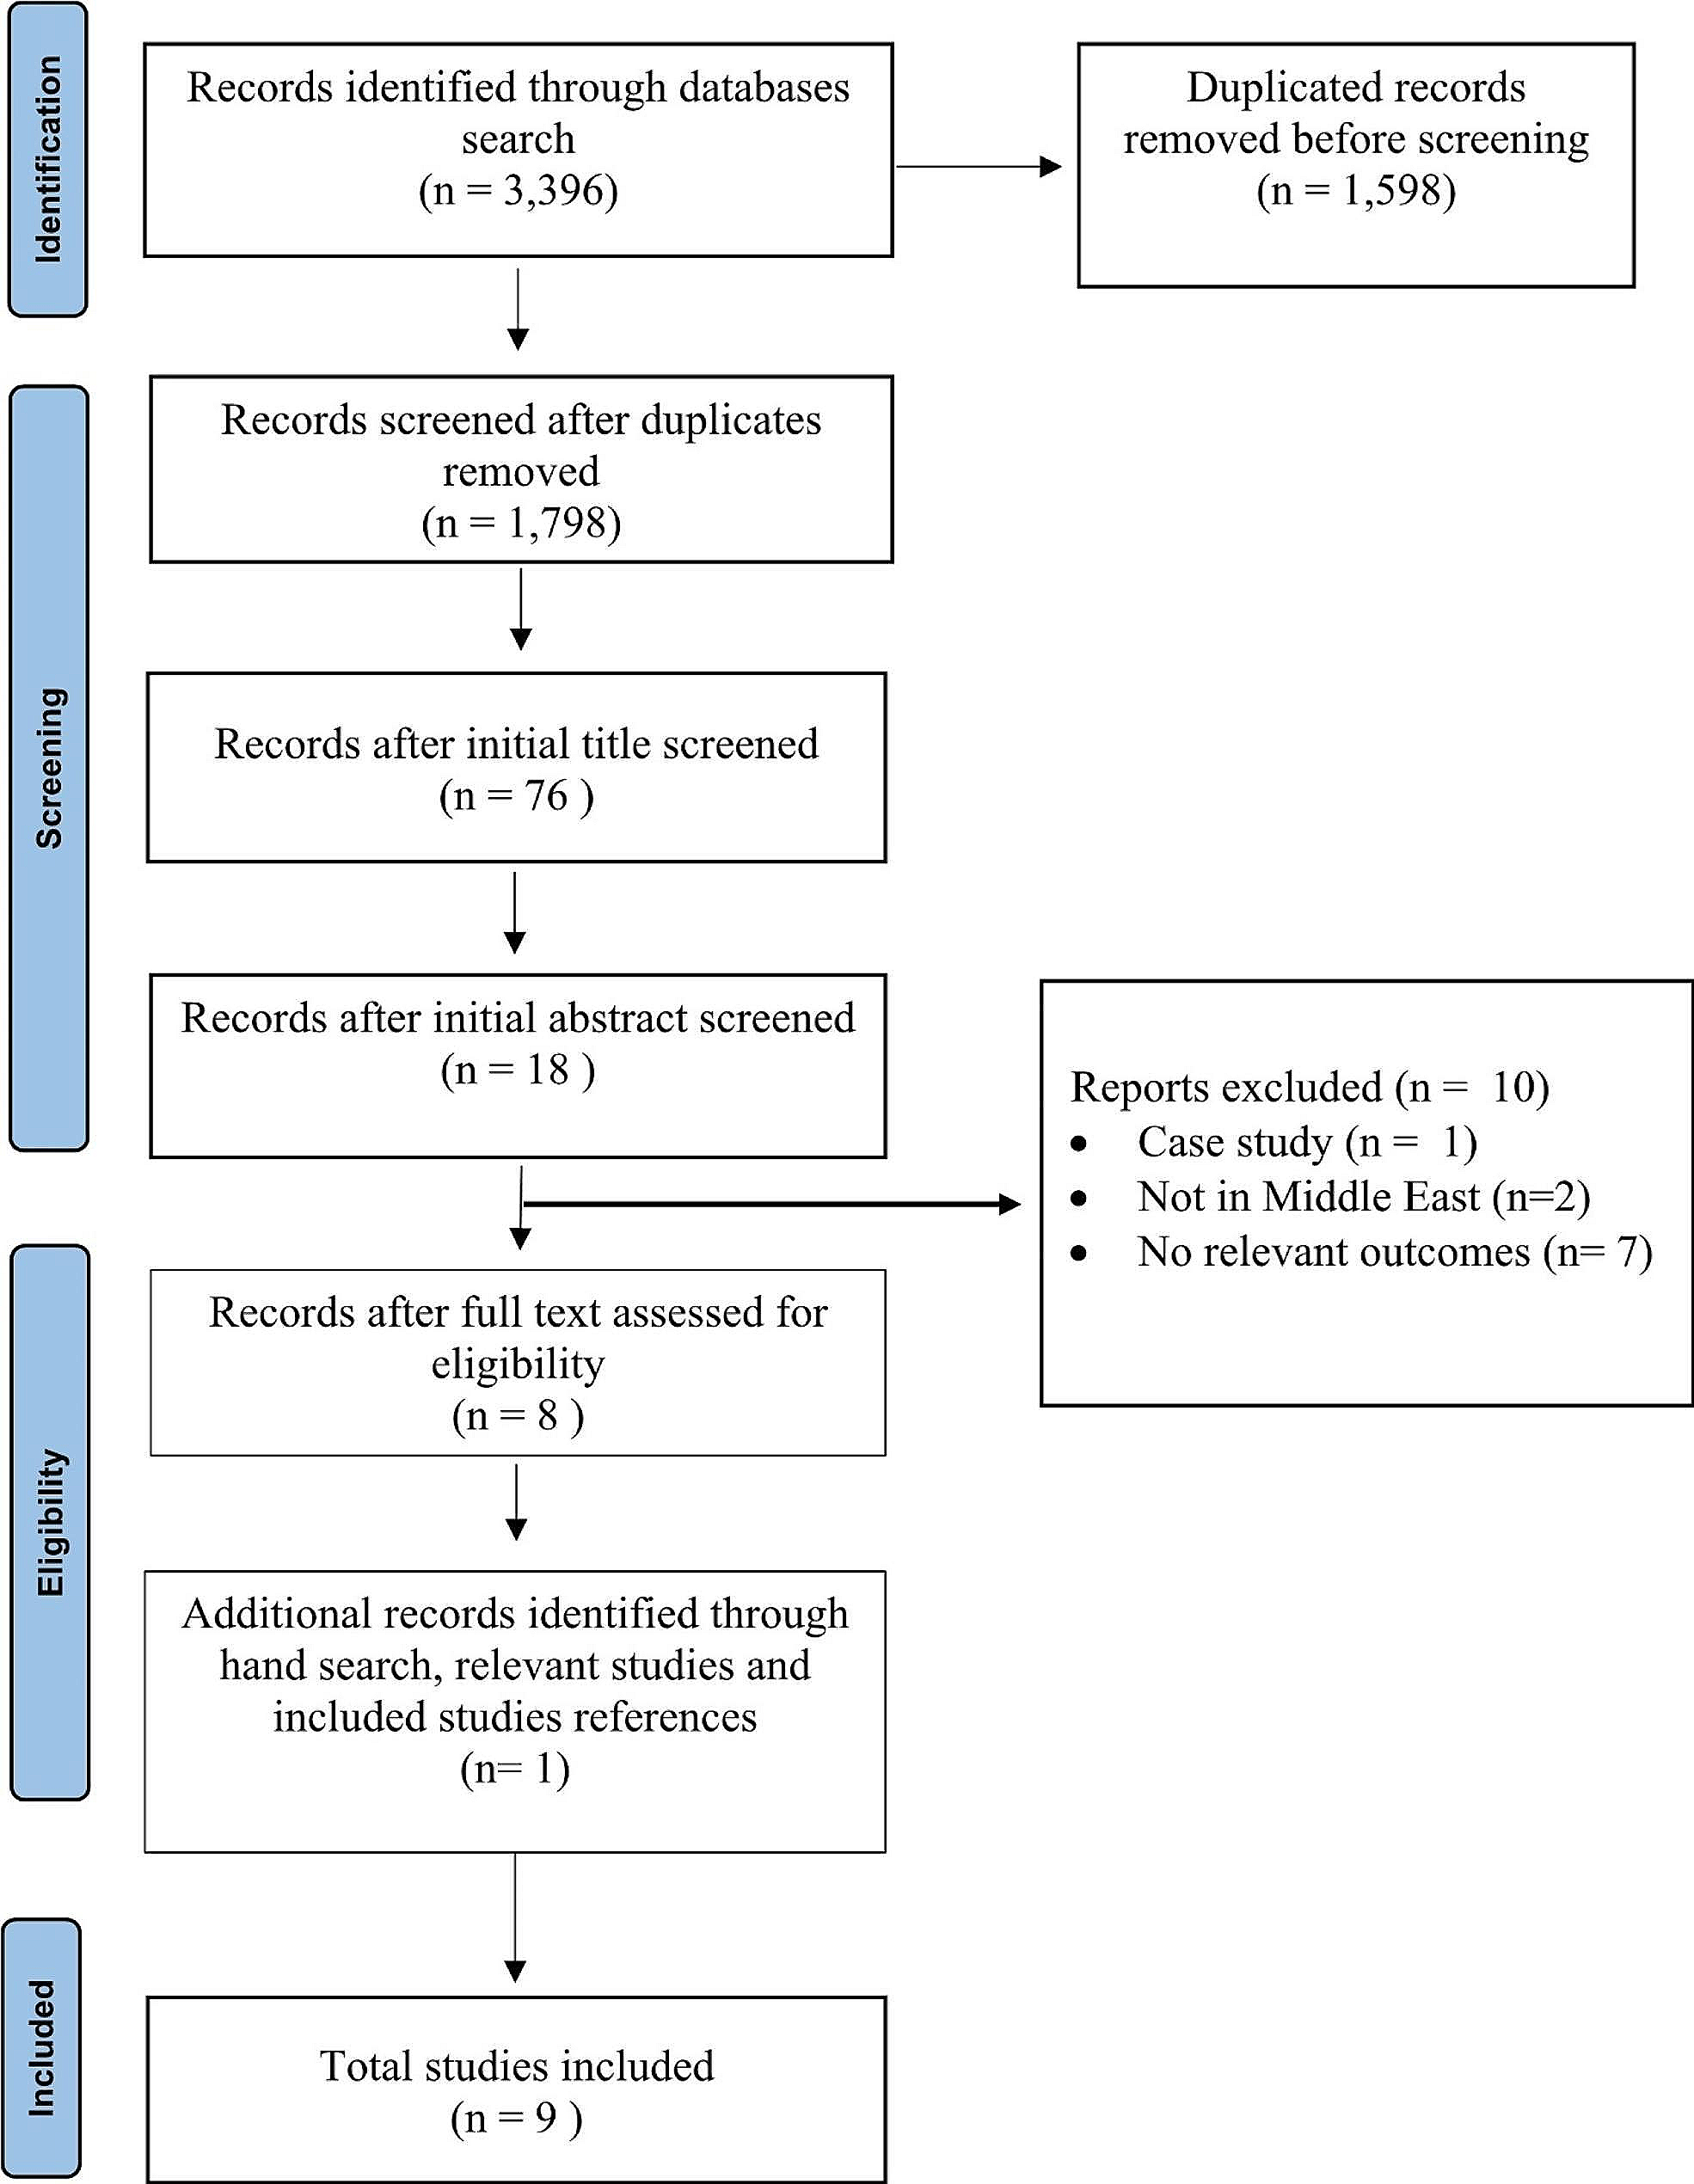 What helps or hinders effective end-of-life care in adult intensive care units in Middle Eastern countries? A systematic review